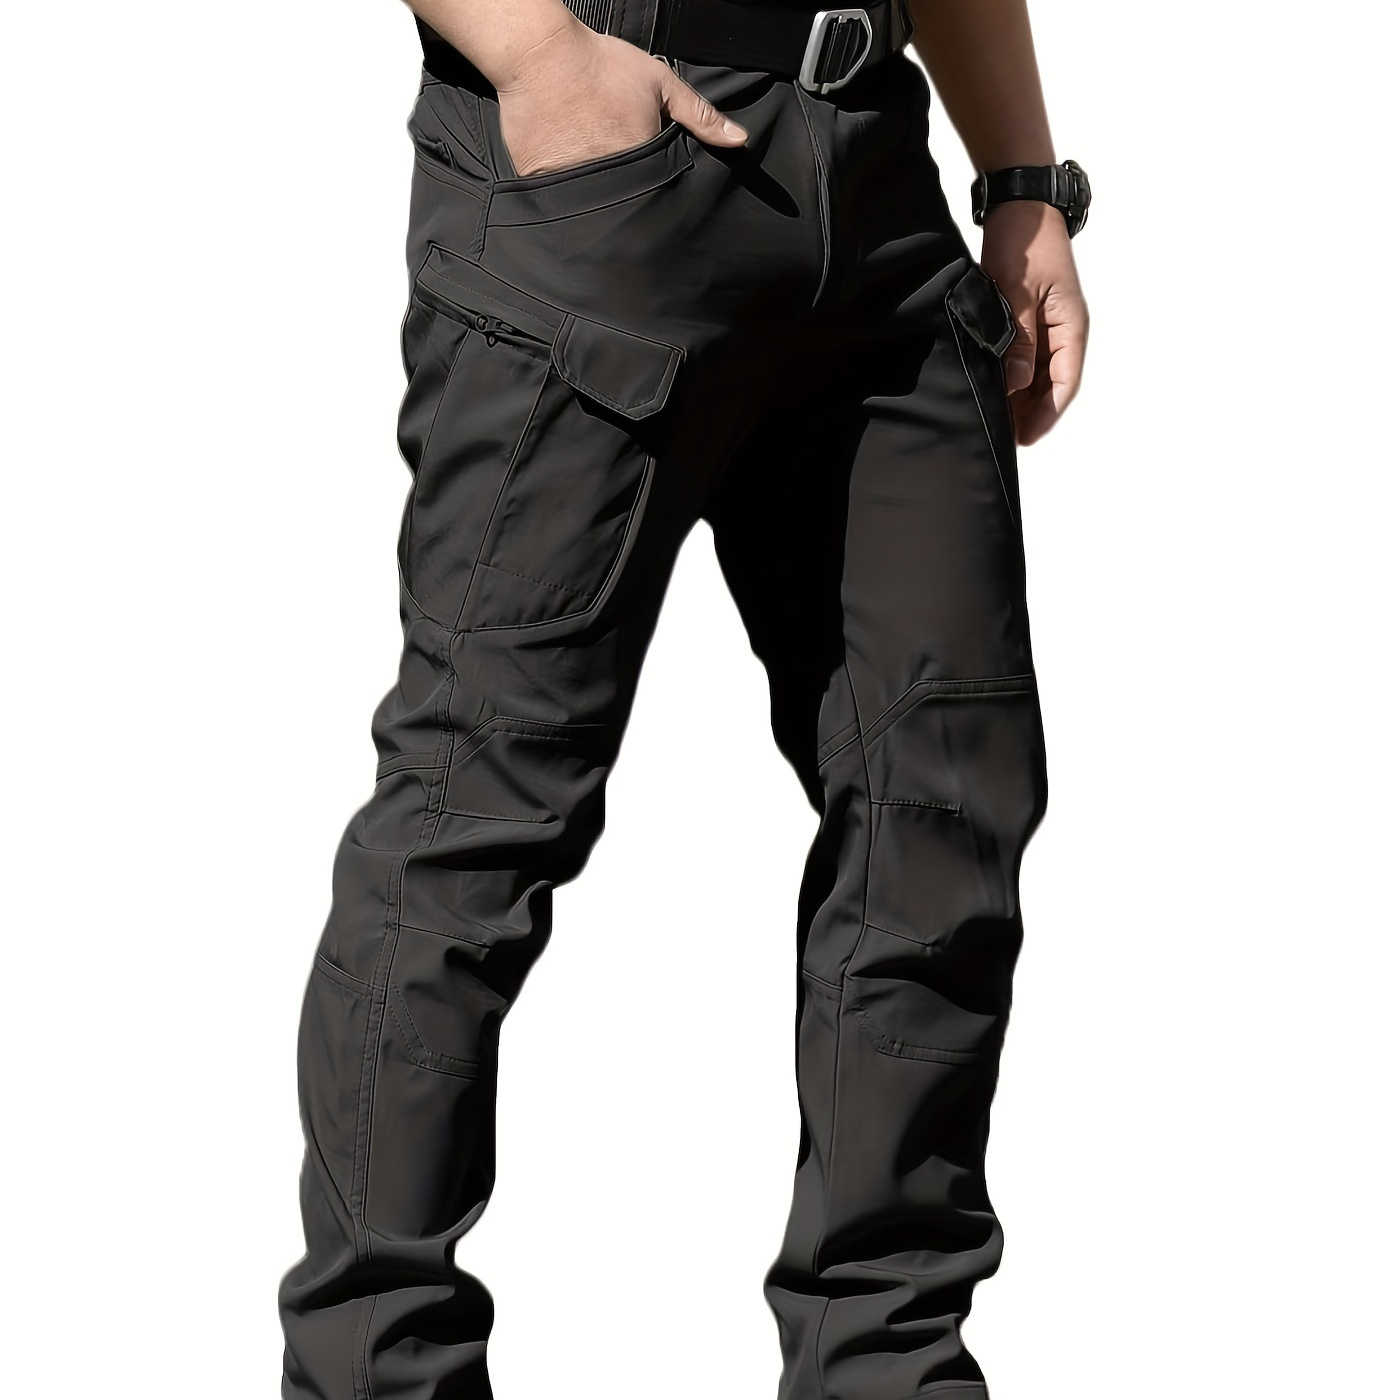 

Men's Cargo Pants, Water-proof Tactical Pants, Lightweight Wear-resistant Hiking Pants, Trousers With Multi Pockets ( No Belt ), Suitable For All Seasons